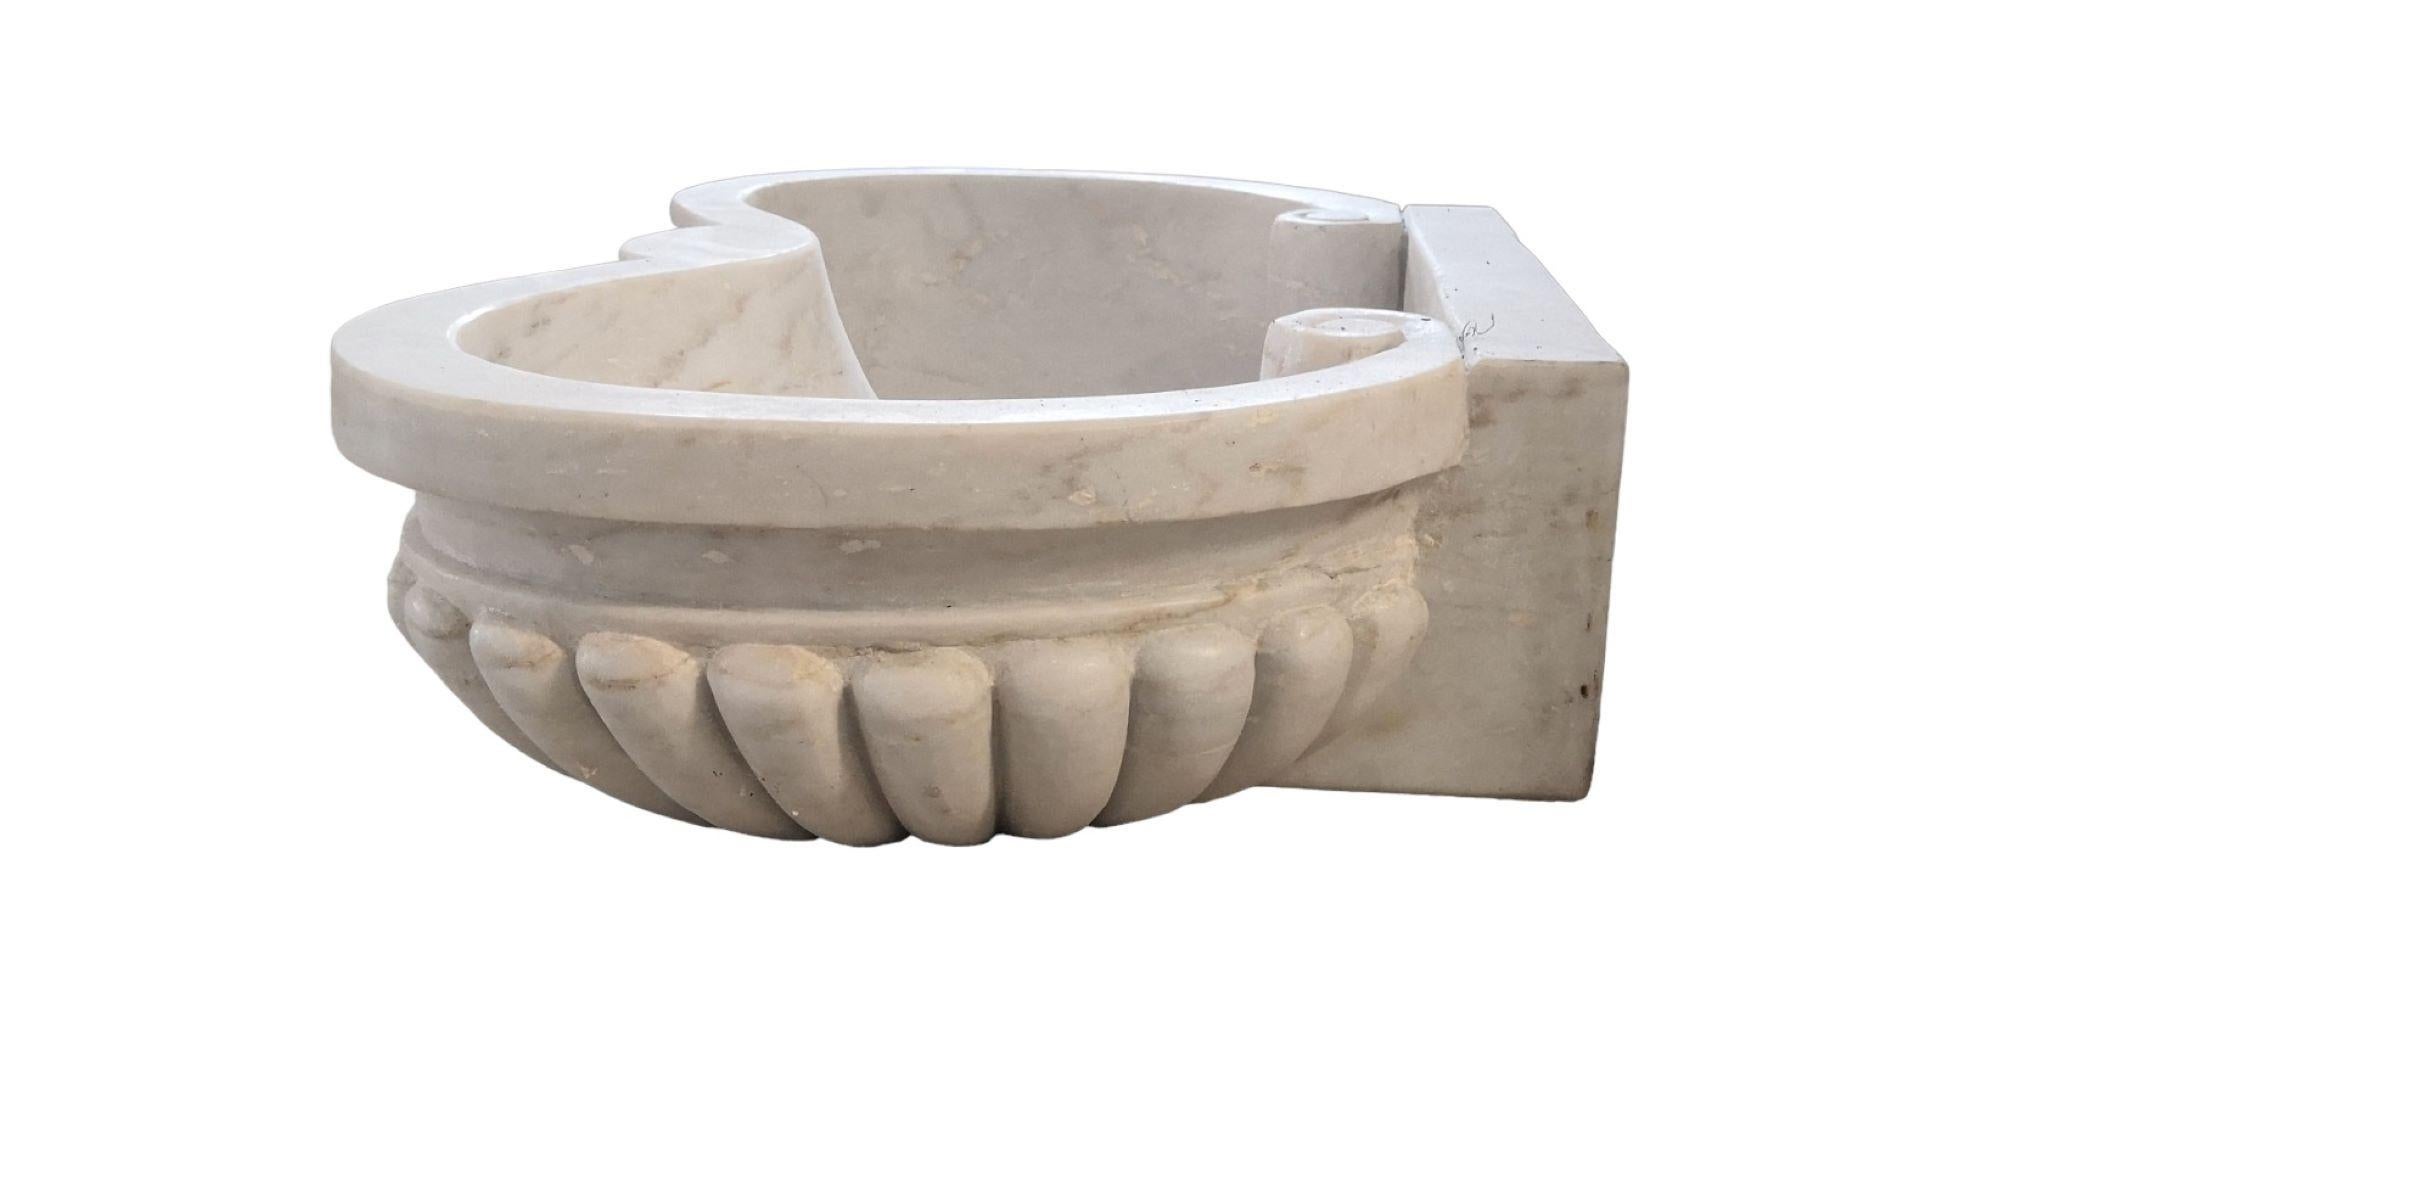 This timeless beautiful Italian classical sink is cut from one single block of white marble, these designs have not changed since Greek and Roman times, it carries superb artistic merit easily fitting in with old and new buildings. 
It can also